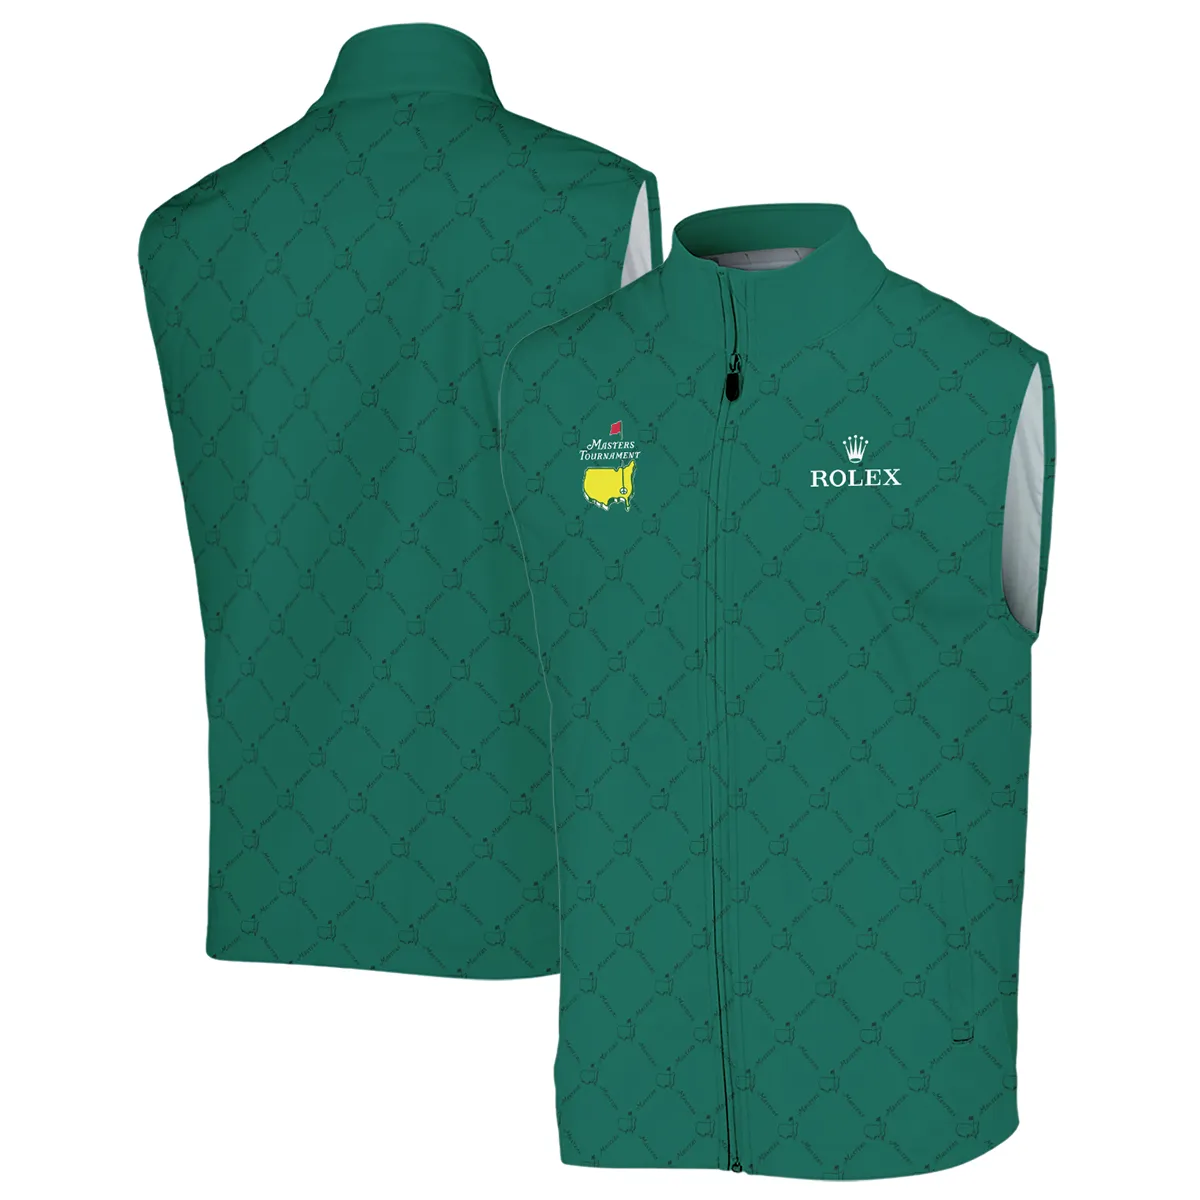 Golf Sport Pattern Color Green Mix Black Masters Tournament Rolex Hoodie Shirt Style Classic